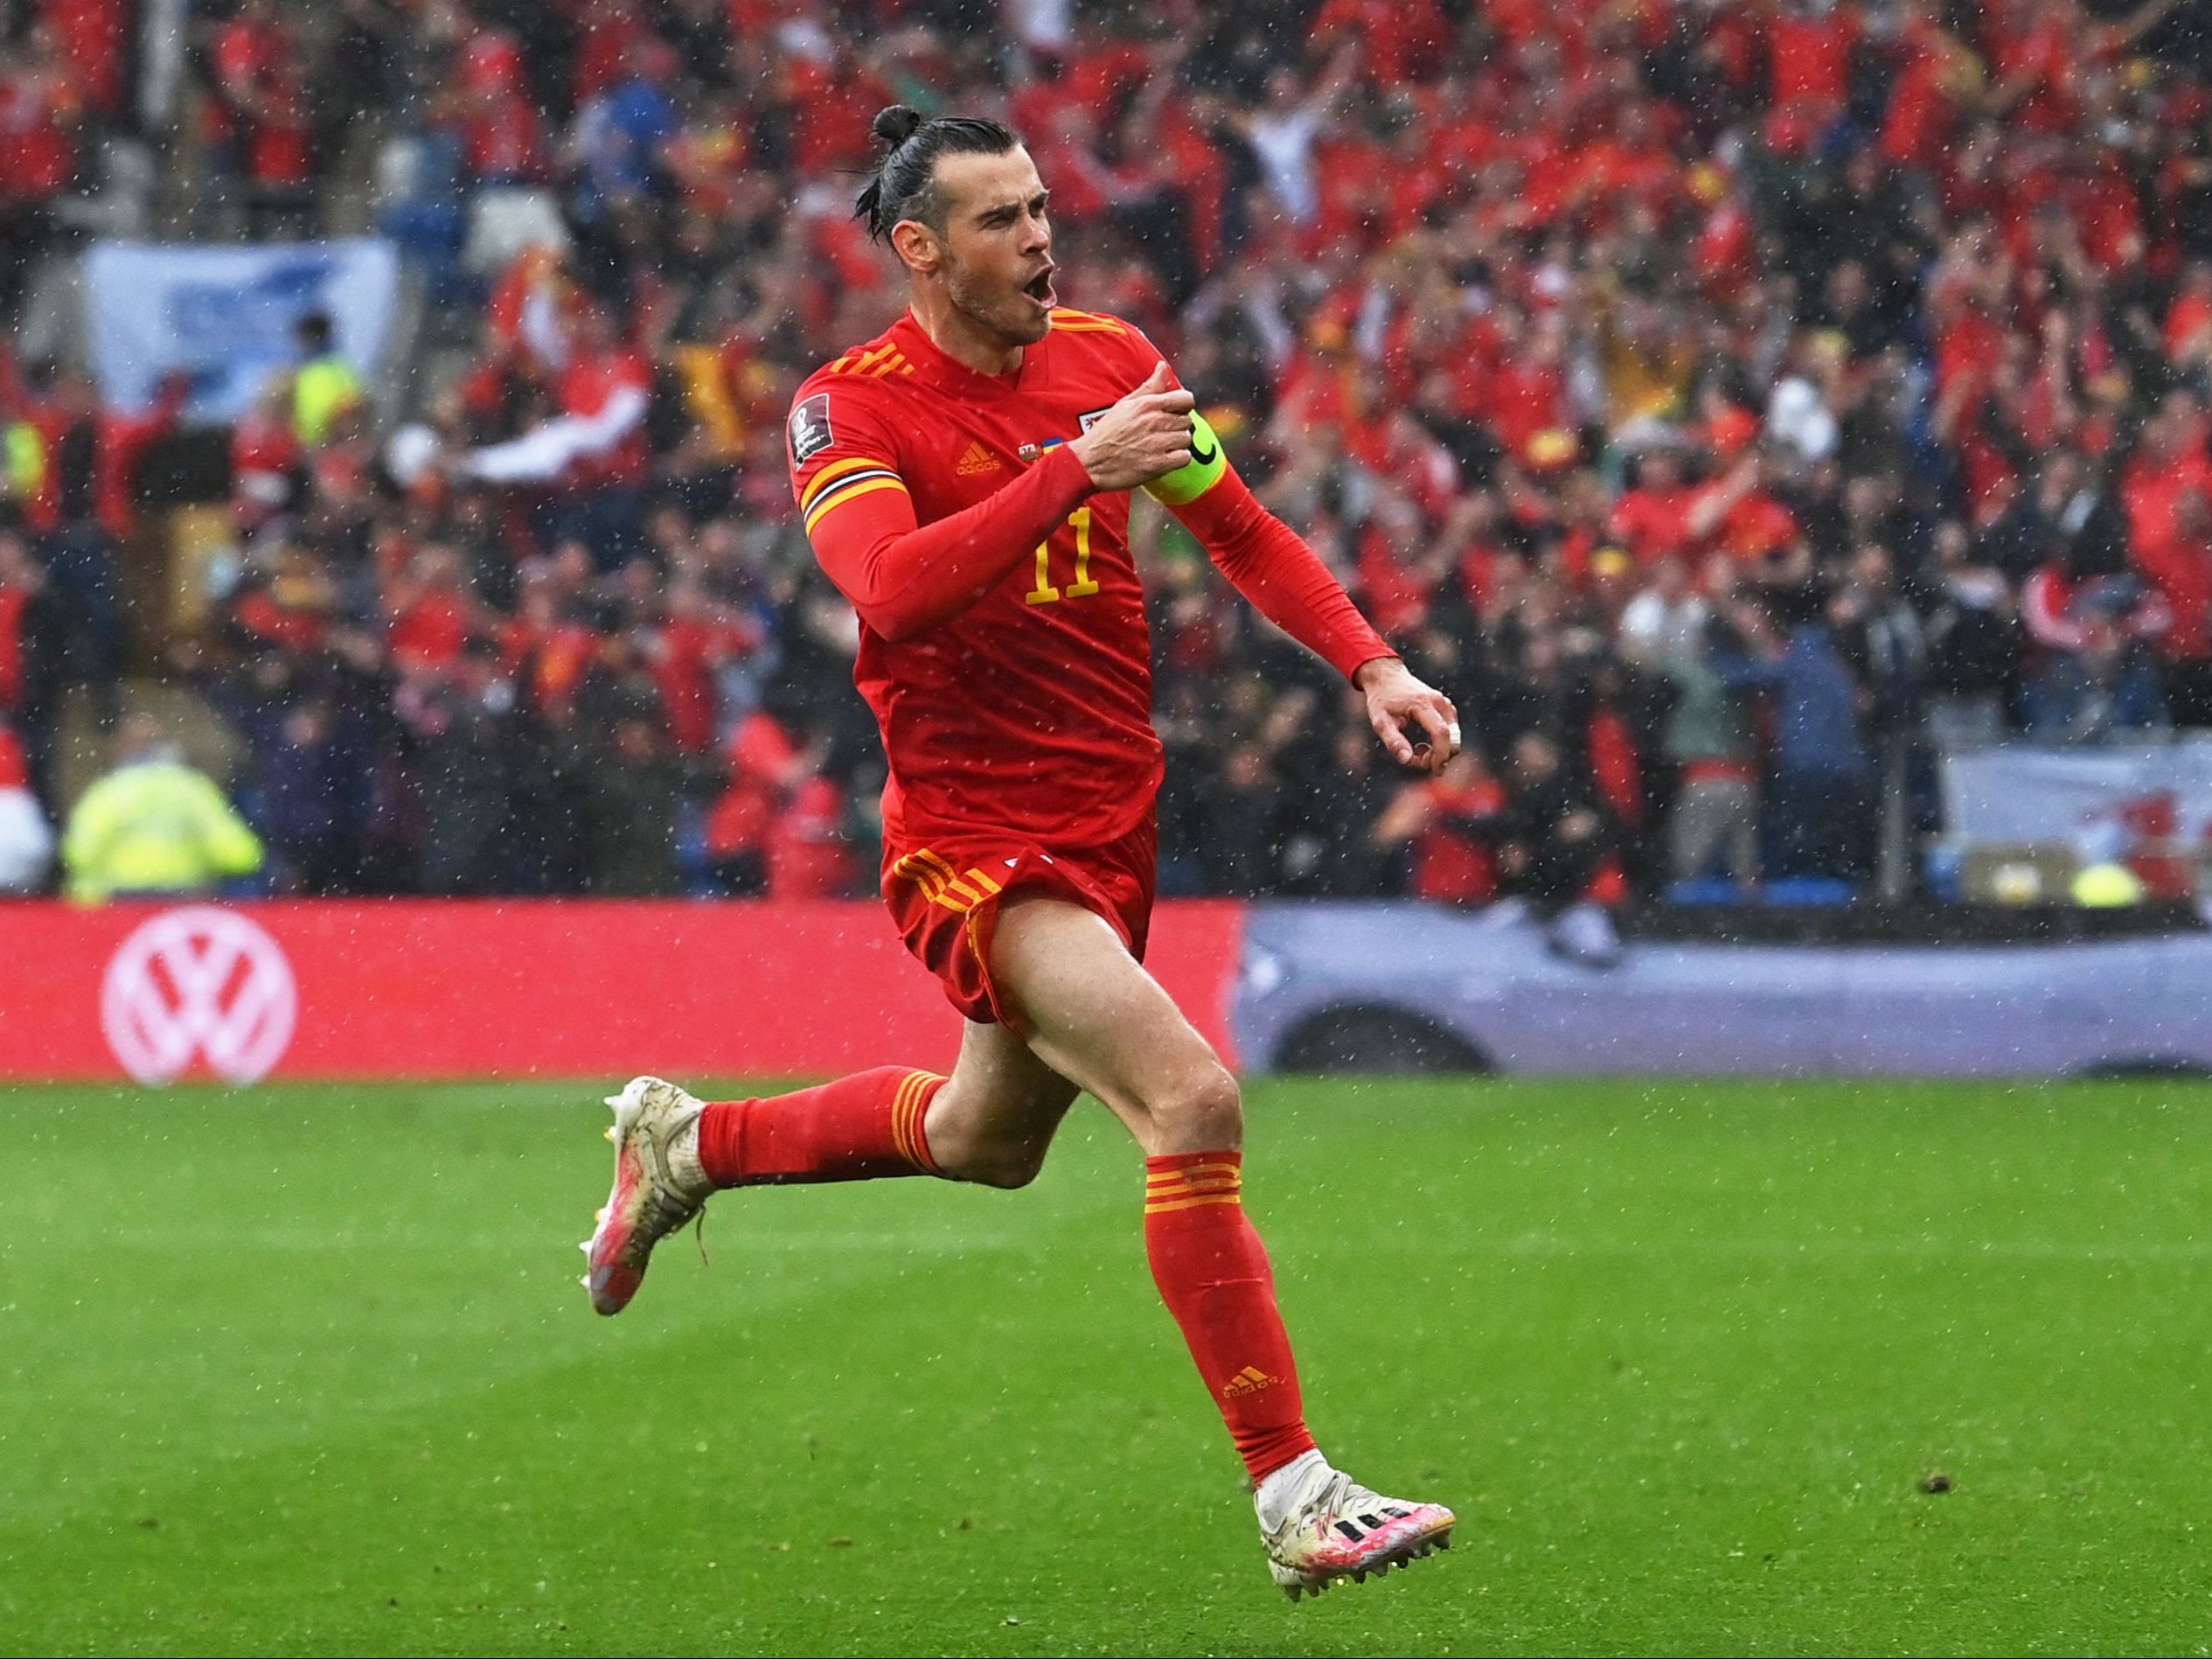 Bale is Wales’ all-time top scorer with 40 goals in 108 caps